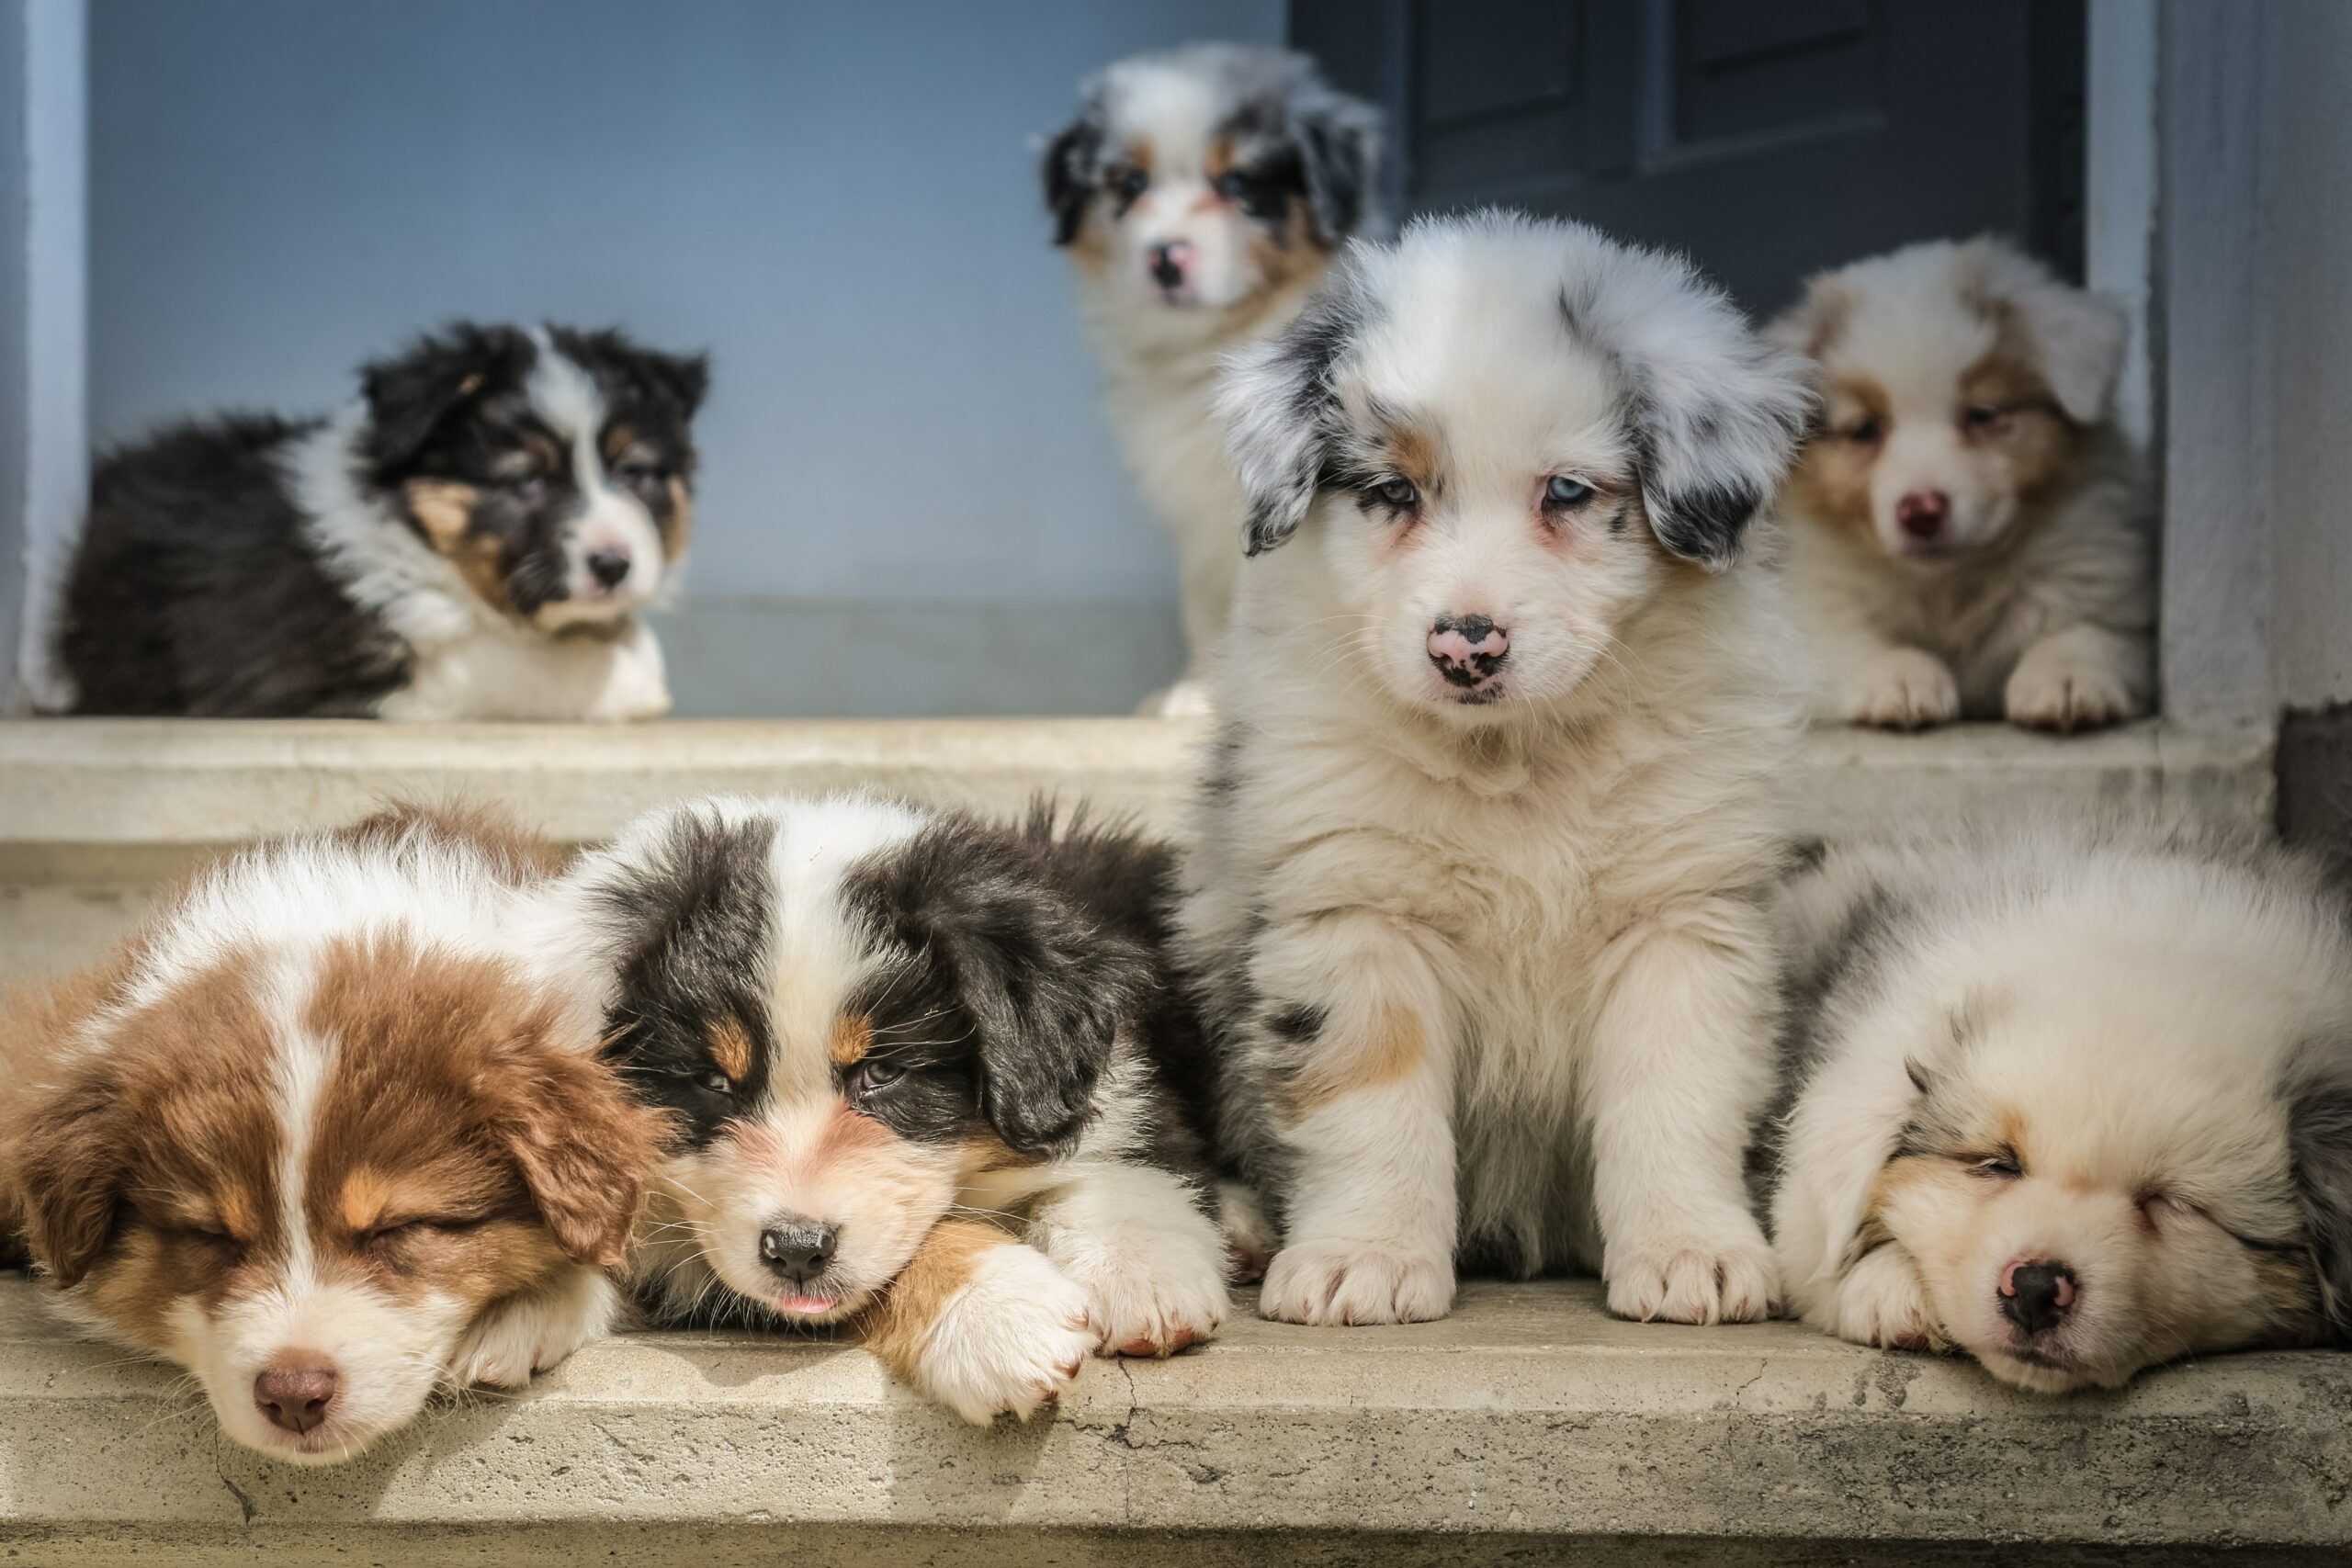 Avoiding Puppy Mills When Buying A New Puppy